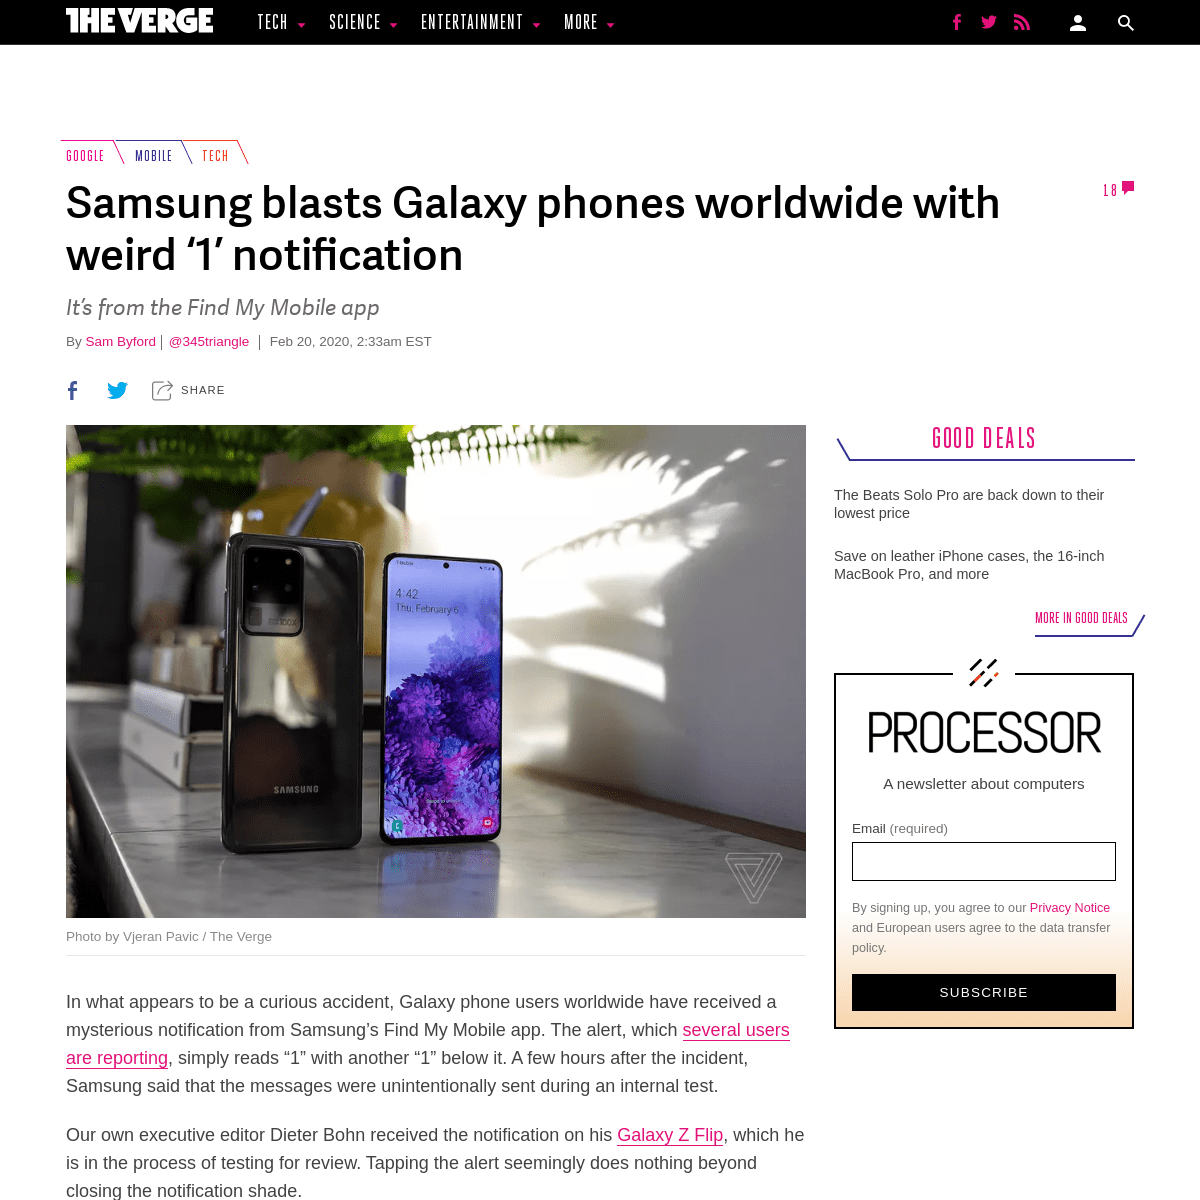 A complete backup of www.theverge.com/2020/2/20/21145130/samsung-find-my-mobile-app-1-notification-galaxy